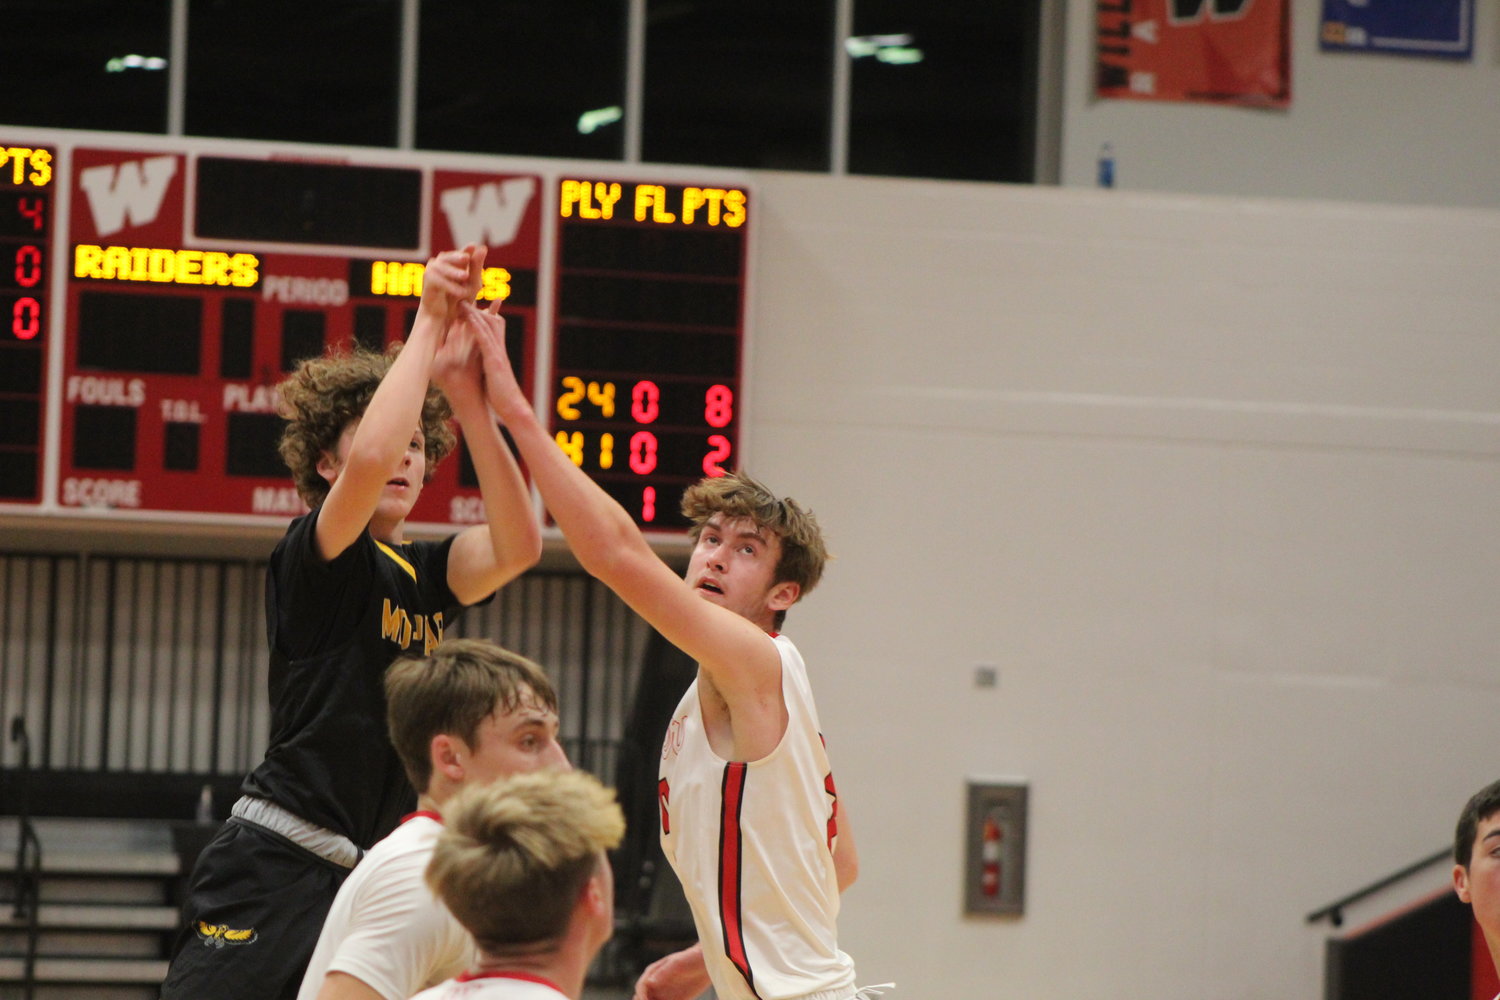 Jack Pennington of Mid-Prairie lets a shot fly in the Golden Hawks game at Williamsburg on Tuesday, Dec. 1.